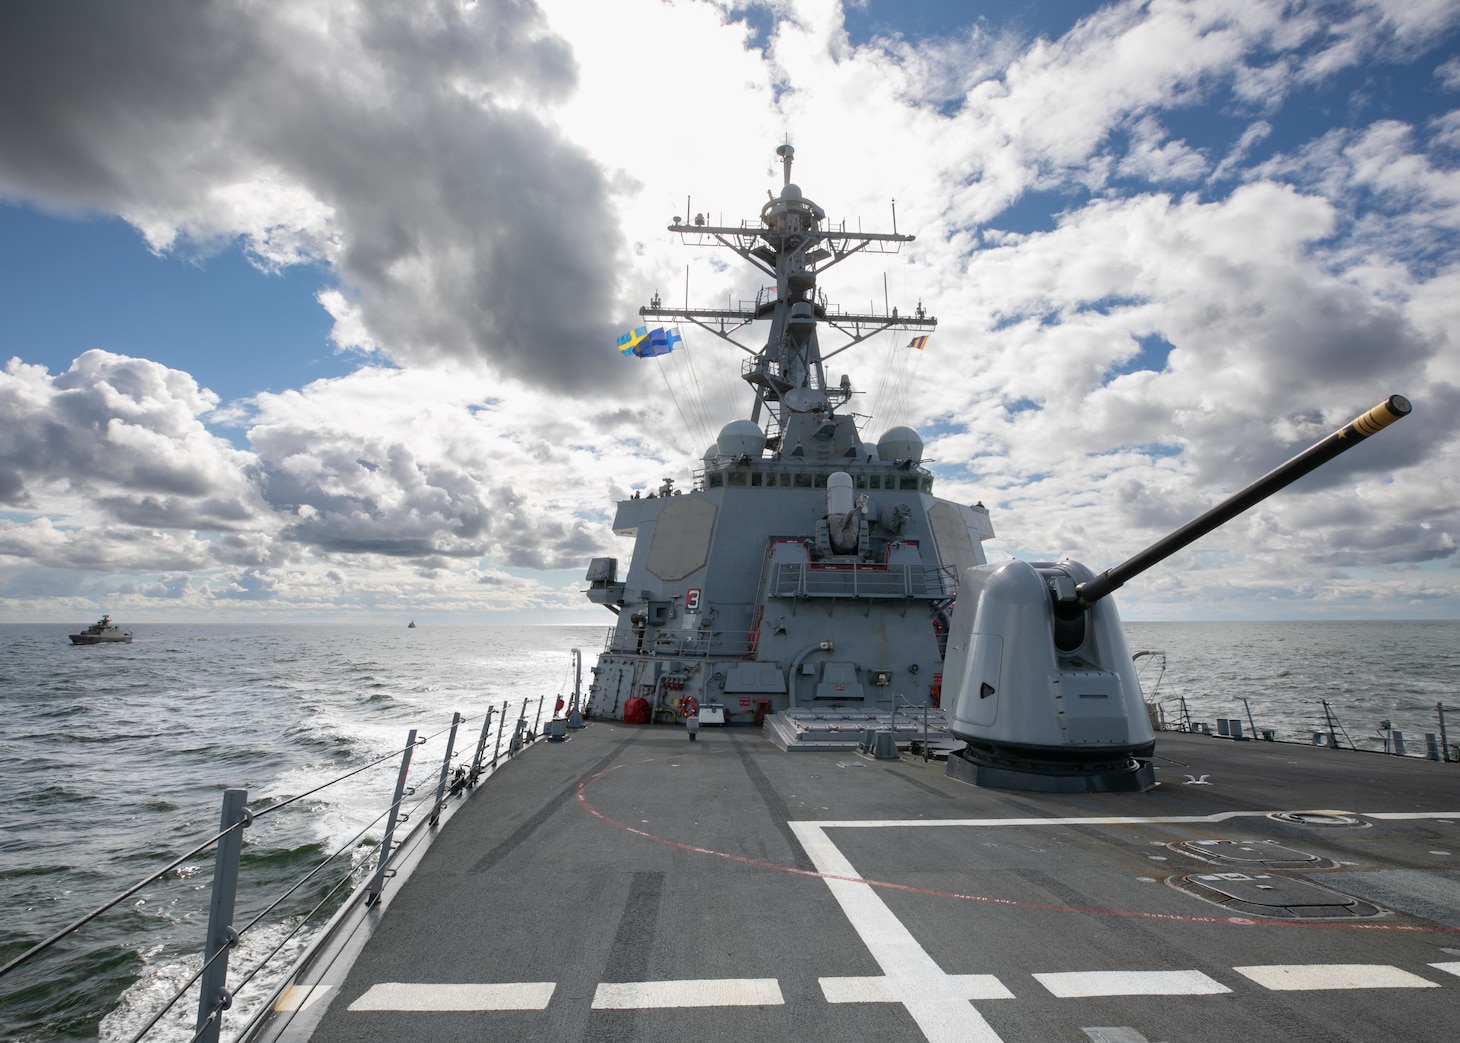 220715-N-DE439-1129 BALTIC SEA (July 15, 2022) The Arleigh Burke-class guided-missile destroyer USS Arleigh Burke (DDG 51) gets in formation during a ship maneuvering exercise with the Finnish Navy Hamina-class missile boat FNS Hamina (80) and the Swedish Navy ship HMS Kullen (M74), July 15, 2022. Arleigh Burke is on a scheduled deployment in the U.S. Naval Forces Europe area of operations, employed by U.S. Sixth Fleet to defend U.S., allied and partner interests. (U.S. Navy photo by Mass Communication Specialist 2nd Class Almagissel Schuring)